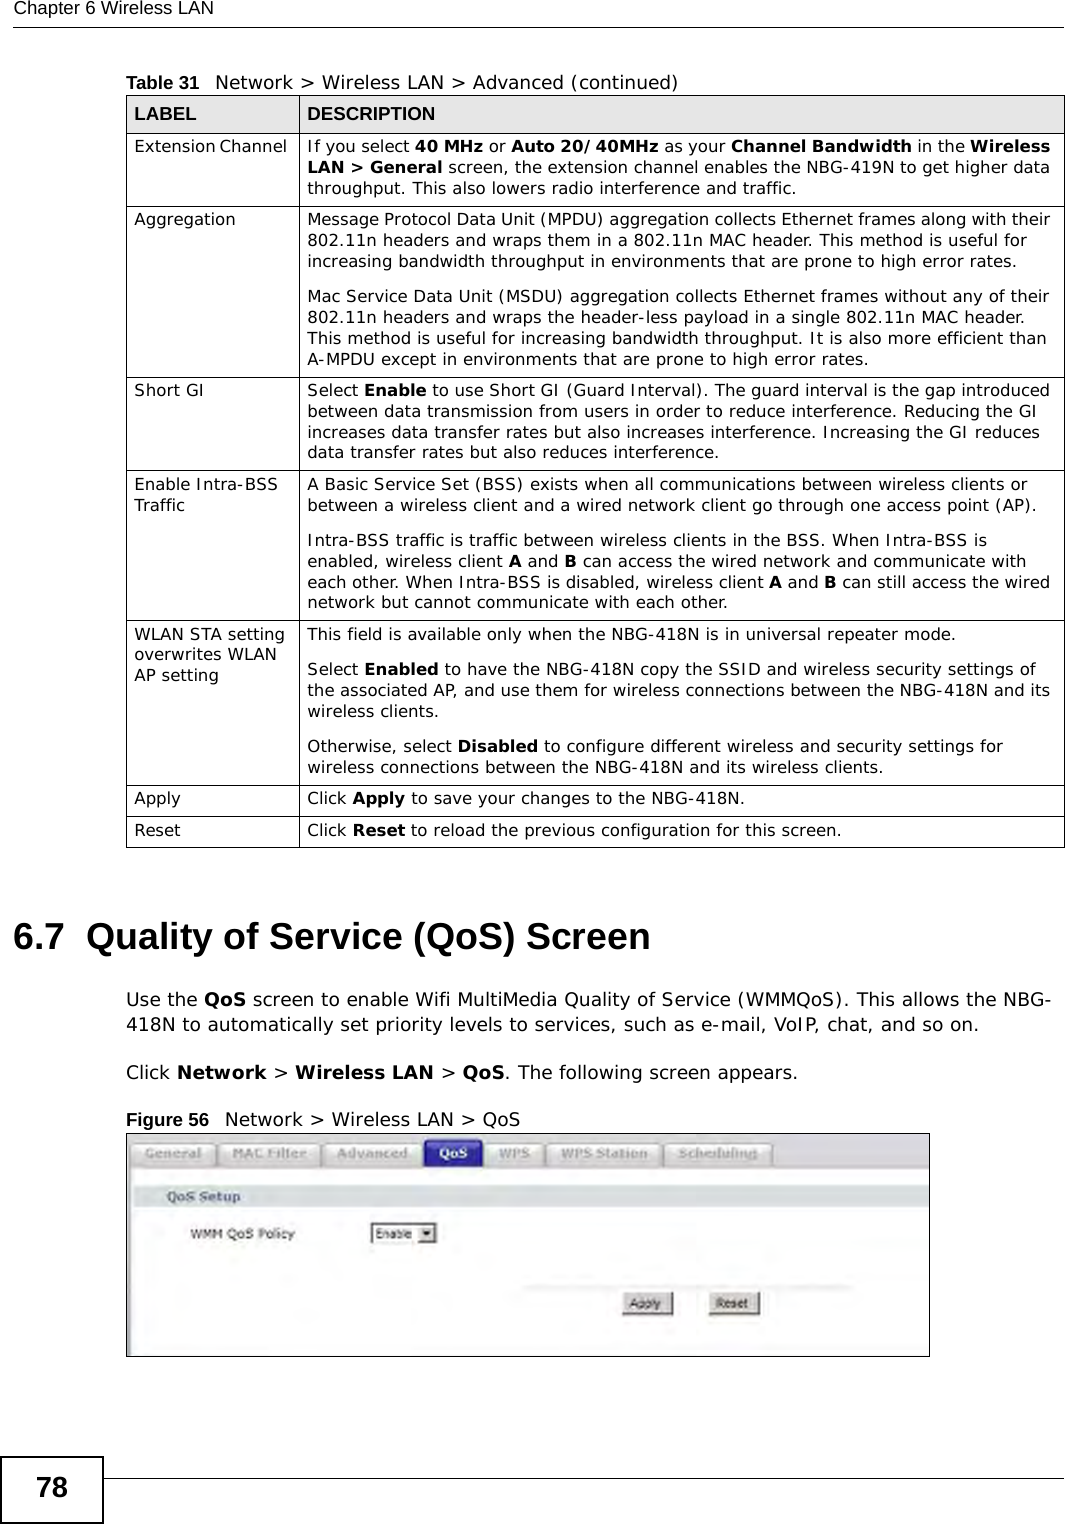 Chapter 6 Wireless LAN786.7  Quality of Service (QoS) ScreenUse the QoS screen to enable Wifi MultiMedia Quality of Service (WMMQoS). This allows the NBG-418N to automatically set priority levels to services, such as e-mail, VoIP, chat, and so on.Click Network &gt; Wireless LAN &gt; QoS. The following screen appears.Figure 56   Network &gt; Wireless LAN &gt; QoS Extension Channel  If you select 40 MHz or Auto 20/40MHz as your Channel Bandwidth in the Wireless LAN &gt; General screen, the extension channel enables the NBG-419N to get higher data throughput. This also lowers radio interference and traffic.Aggregation Message Protocol Data Unit (MPDU) aggregation collects Ethernet frames along with their 802.11n headers and wraps them in a 802.11n MAC header. This method is useful for increasing bandwidth throughput in environments that are prone to high error rates.Mac Service Data Unit (MSDU) aggregation collects Ethernet frames without any of their 802.11n headers and wraps the header-less payload in a single 802.11n MAC header. This method is useful for increasing bandwidth throughput. It is also more efficient than A-MPDU except in environments that are prone to high error rates.Short GI Select Enable to use Short GI (Guard Interval). The guard interval is the gap introduced between data transmission from users in order to reduce interference. Reducing the GI increases data transfer rates but also increases interference. Increasing the GI reduces data transfer rates but also reduces interference.Enable Intra-BSS Traffic A Basic Service Set (BSS) exists when all communications between wireless clients or between a wireless client and a wired network client go through one access point (AP). Intra-BSS traffic is traffic between wireless clients in the BSS. When Intra-BSS is enabled, wireless client A and B can access the wired network and communicate with each other. When Intra-BSS is disabled, wireless client A and B can still access the wired network but cannot communicate with each other.WLAN STA setting overwrites WLAN AP settingThis field is available only when the NBG-418N is in universal repeater mode.Select Enabled to have the NBG-418N copy the SSID and wireless security settings of the associated AP, and use them for wireless connections between the NBG-418N and its wireless clients.Otherwise, select Disabled to configure different wireless and security settings for wireless connections between the NBG-418N and its wireless clients.Apply Click Apply to save your changes to the NBG-418N.Reset Click Reset to reload the previous configuration for this screen.Table 31   Network &gt; Wireless LAN &gt; Advanced (continued)LABEL DESCRIPTION